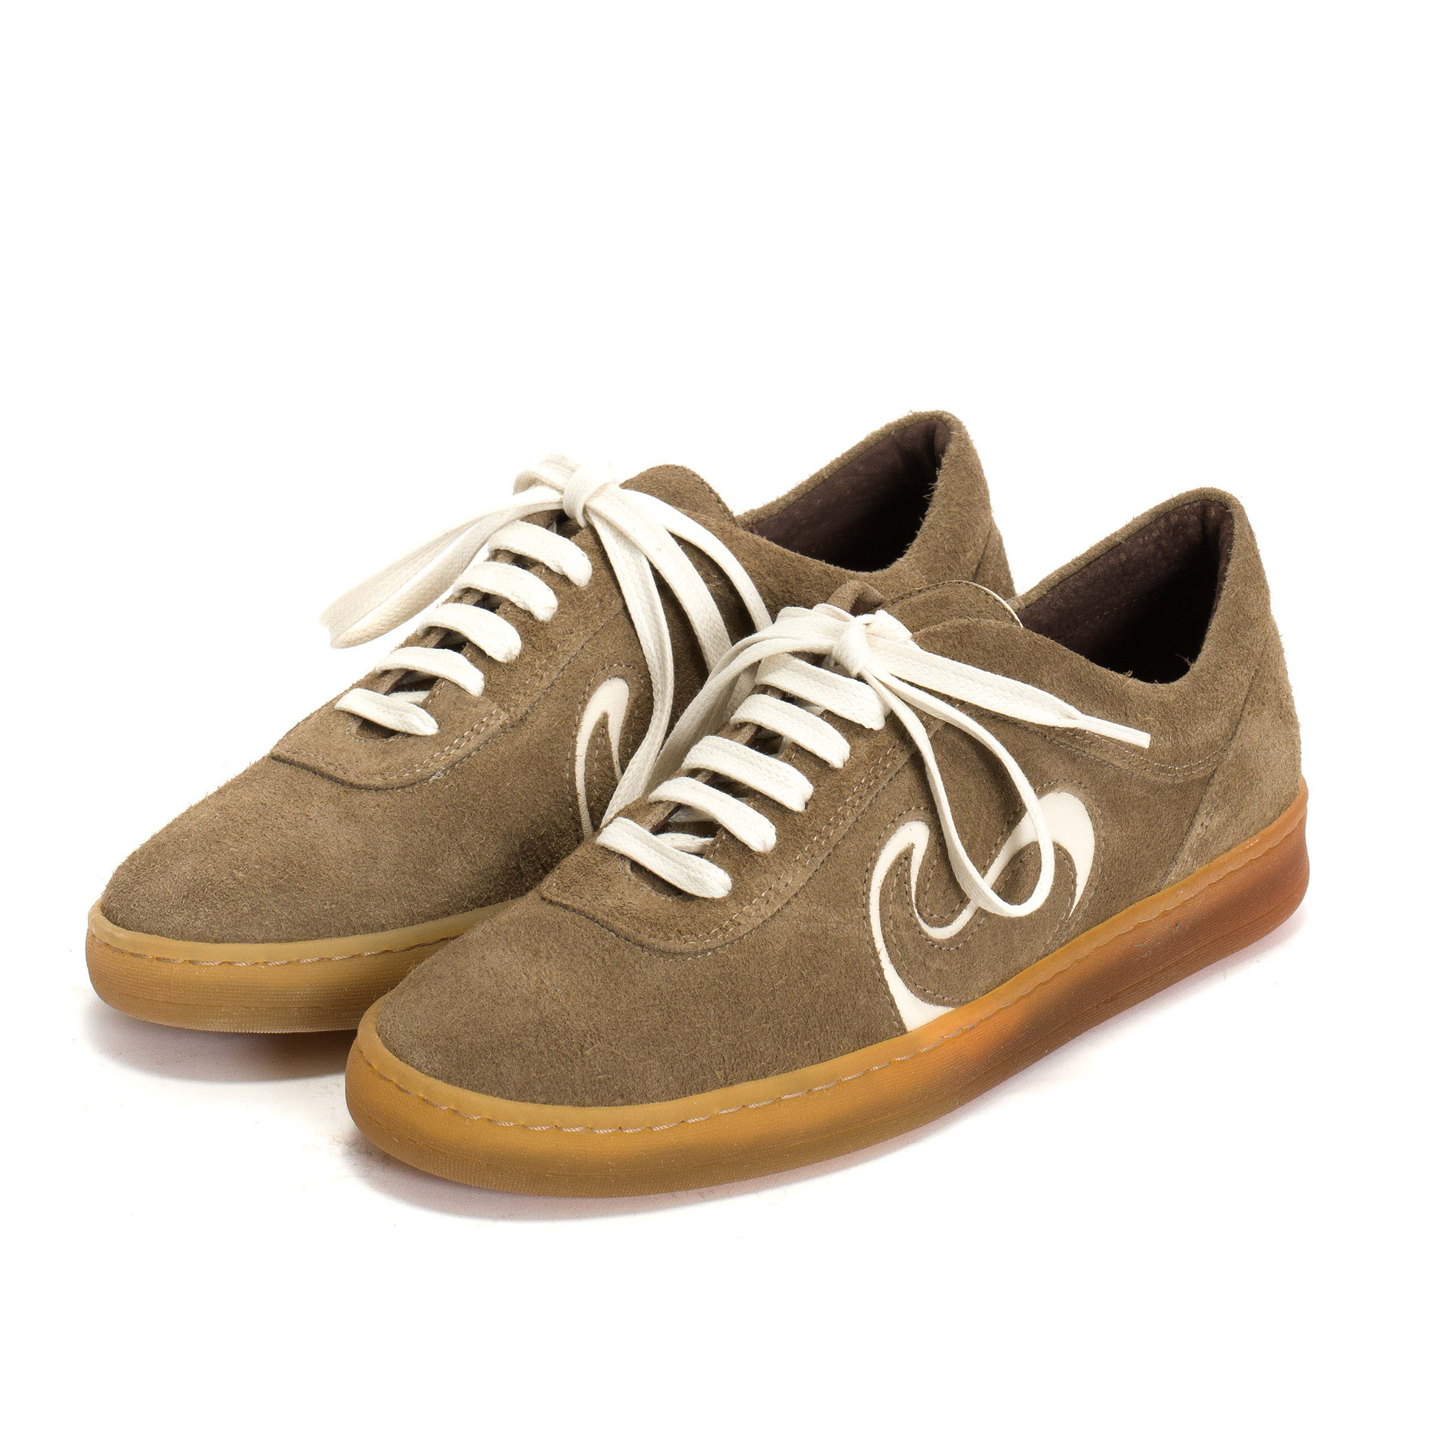 Blaire Plushed Calf Suede Sneakers, Cinnamon